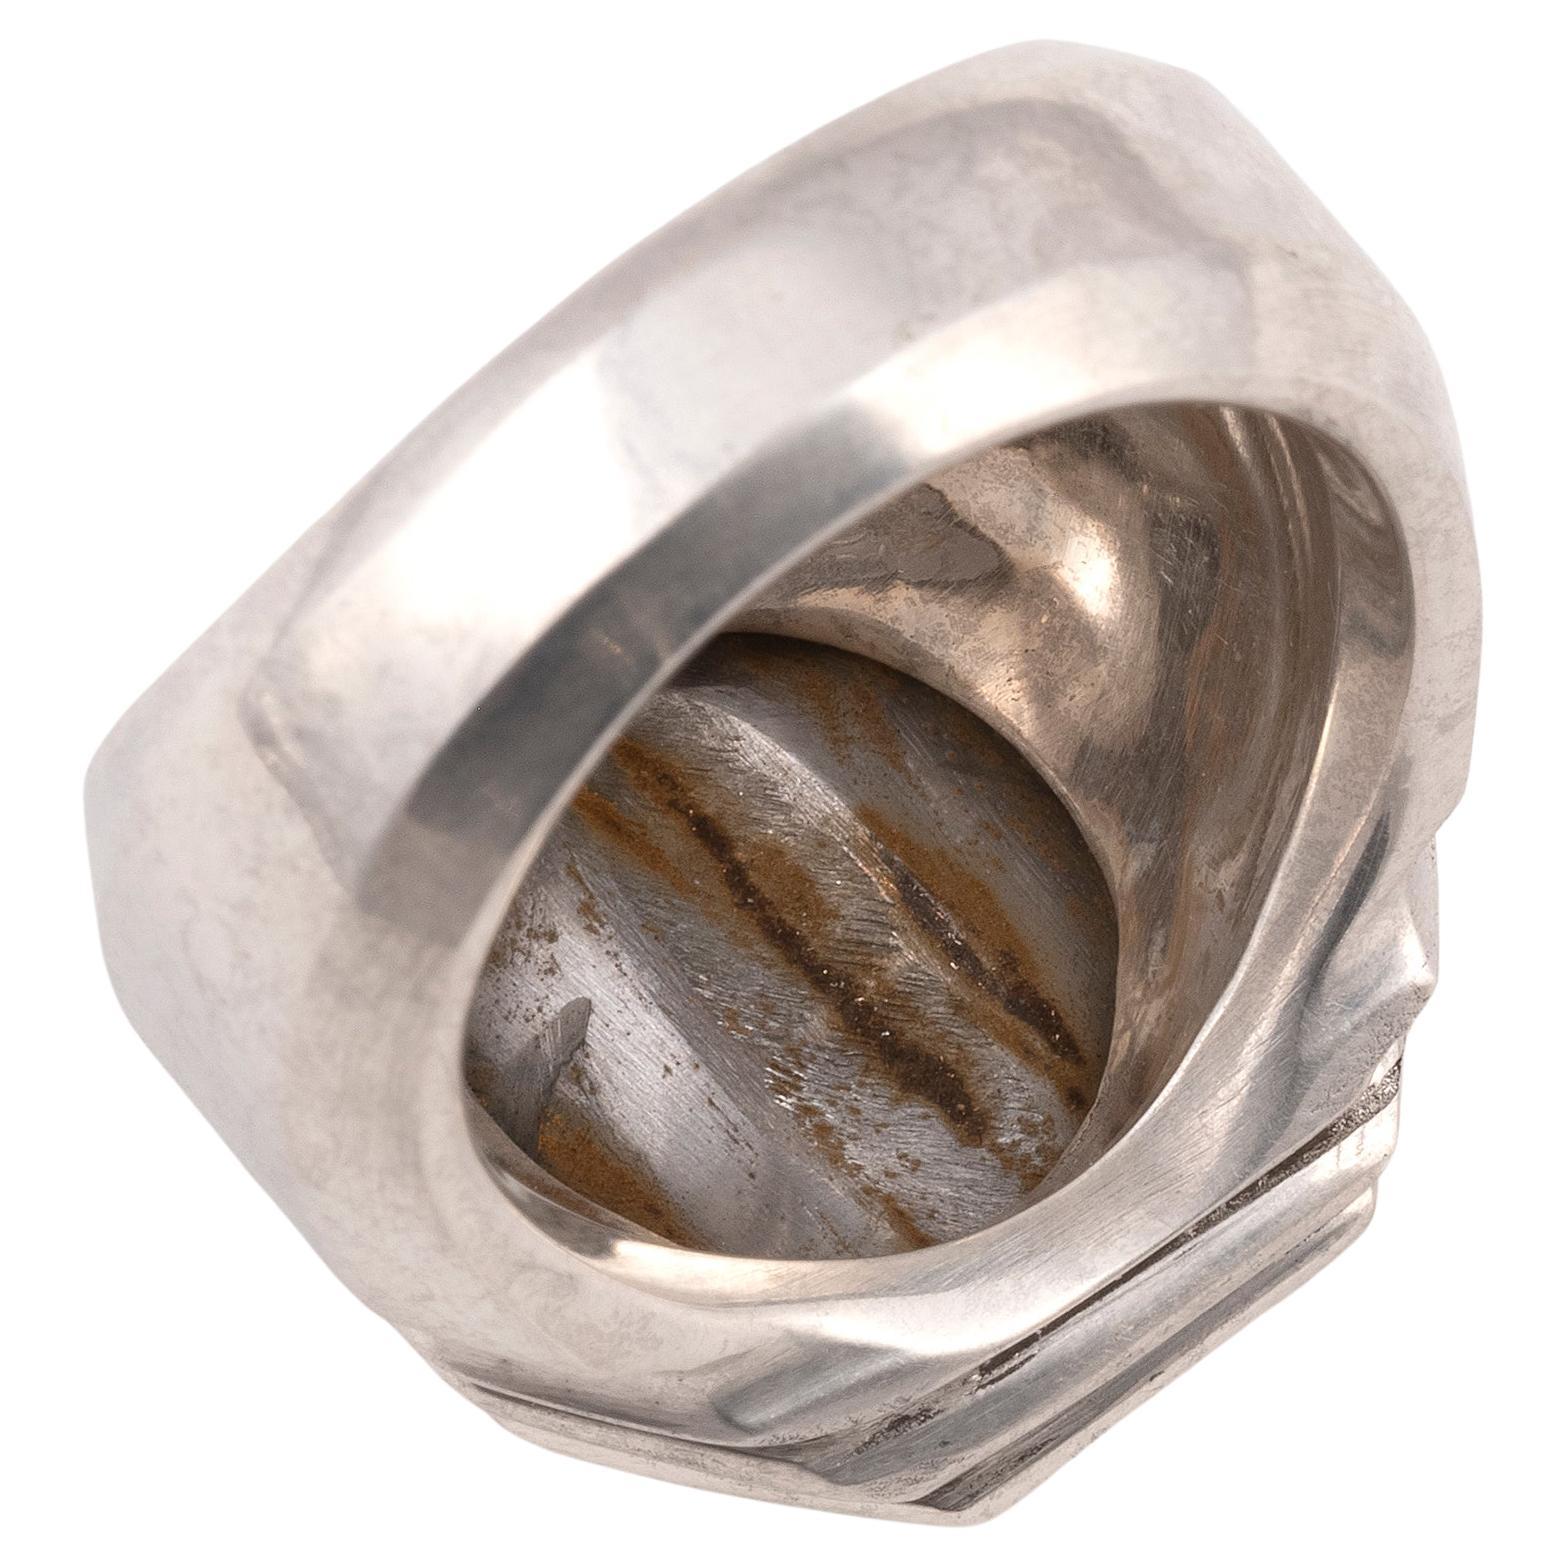 Italian, 1750s An antique steel ring is finely hand-engraved with a noble coat-of-arms. 
Top size 23mm x 21mm
Size 9 
Weight : 31gr.